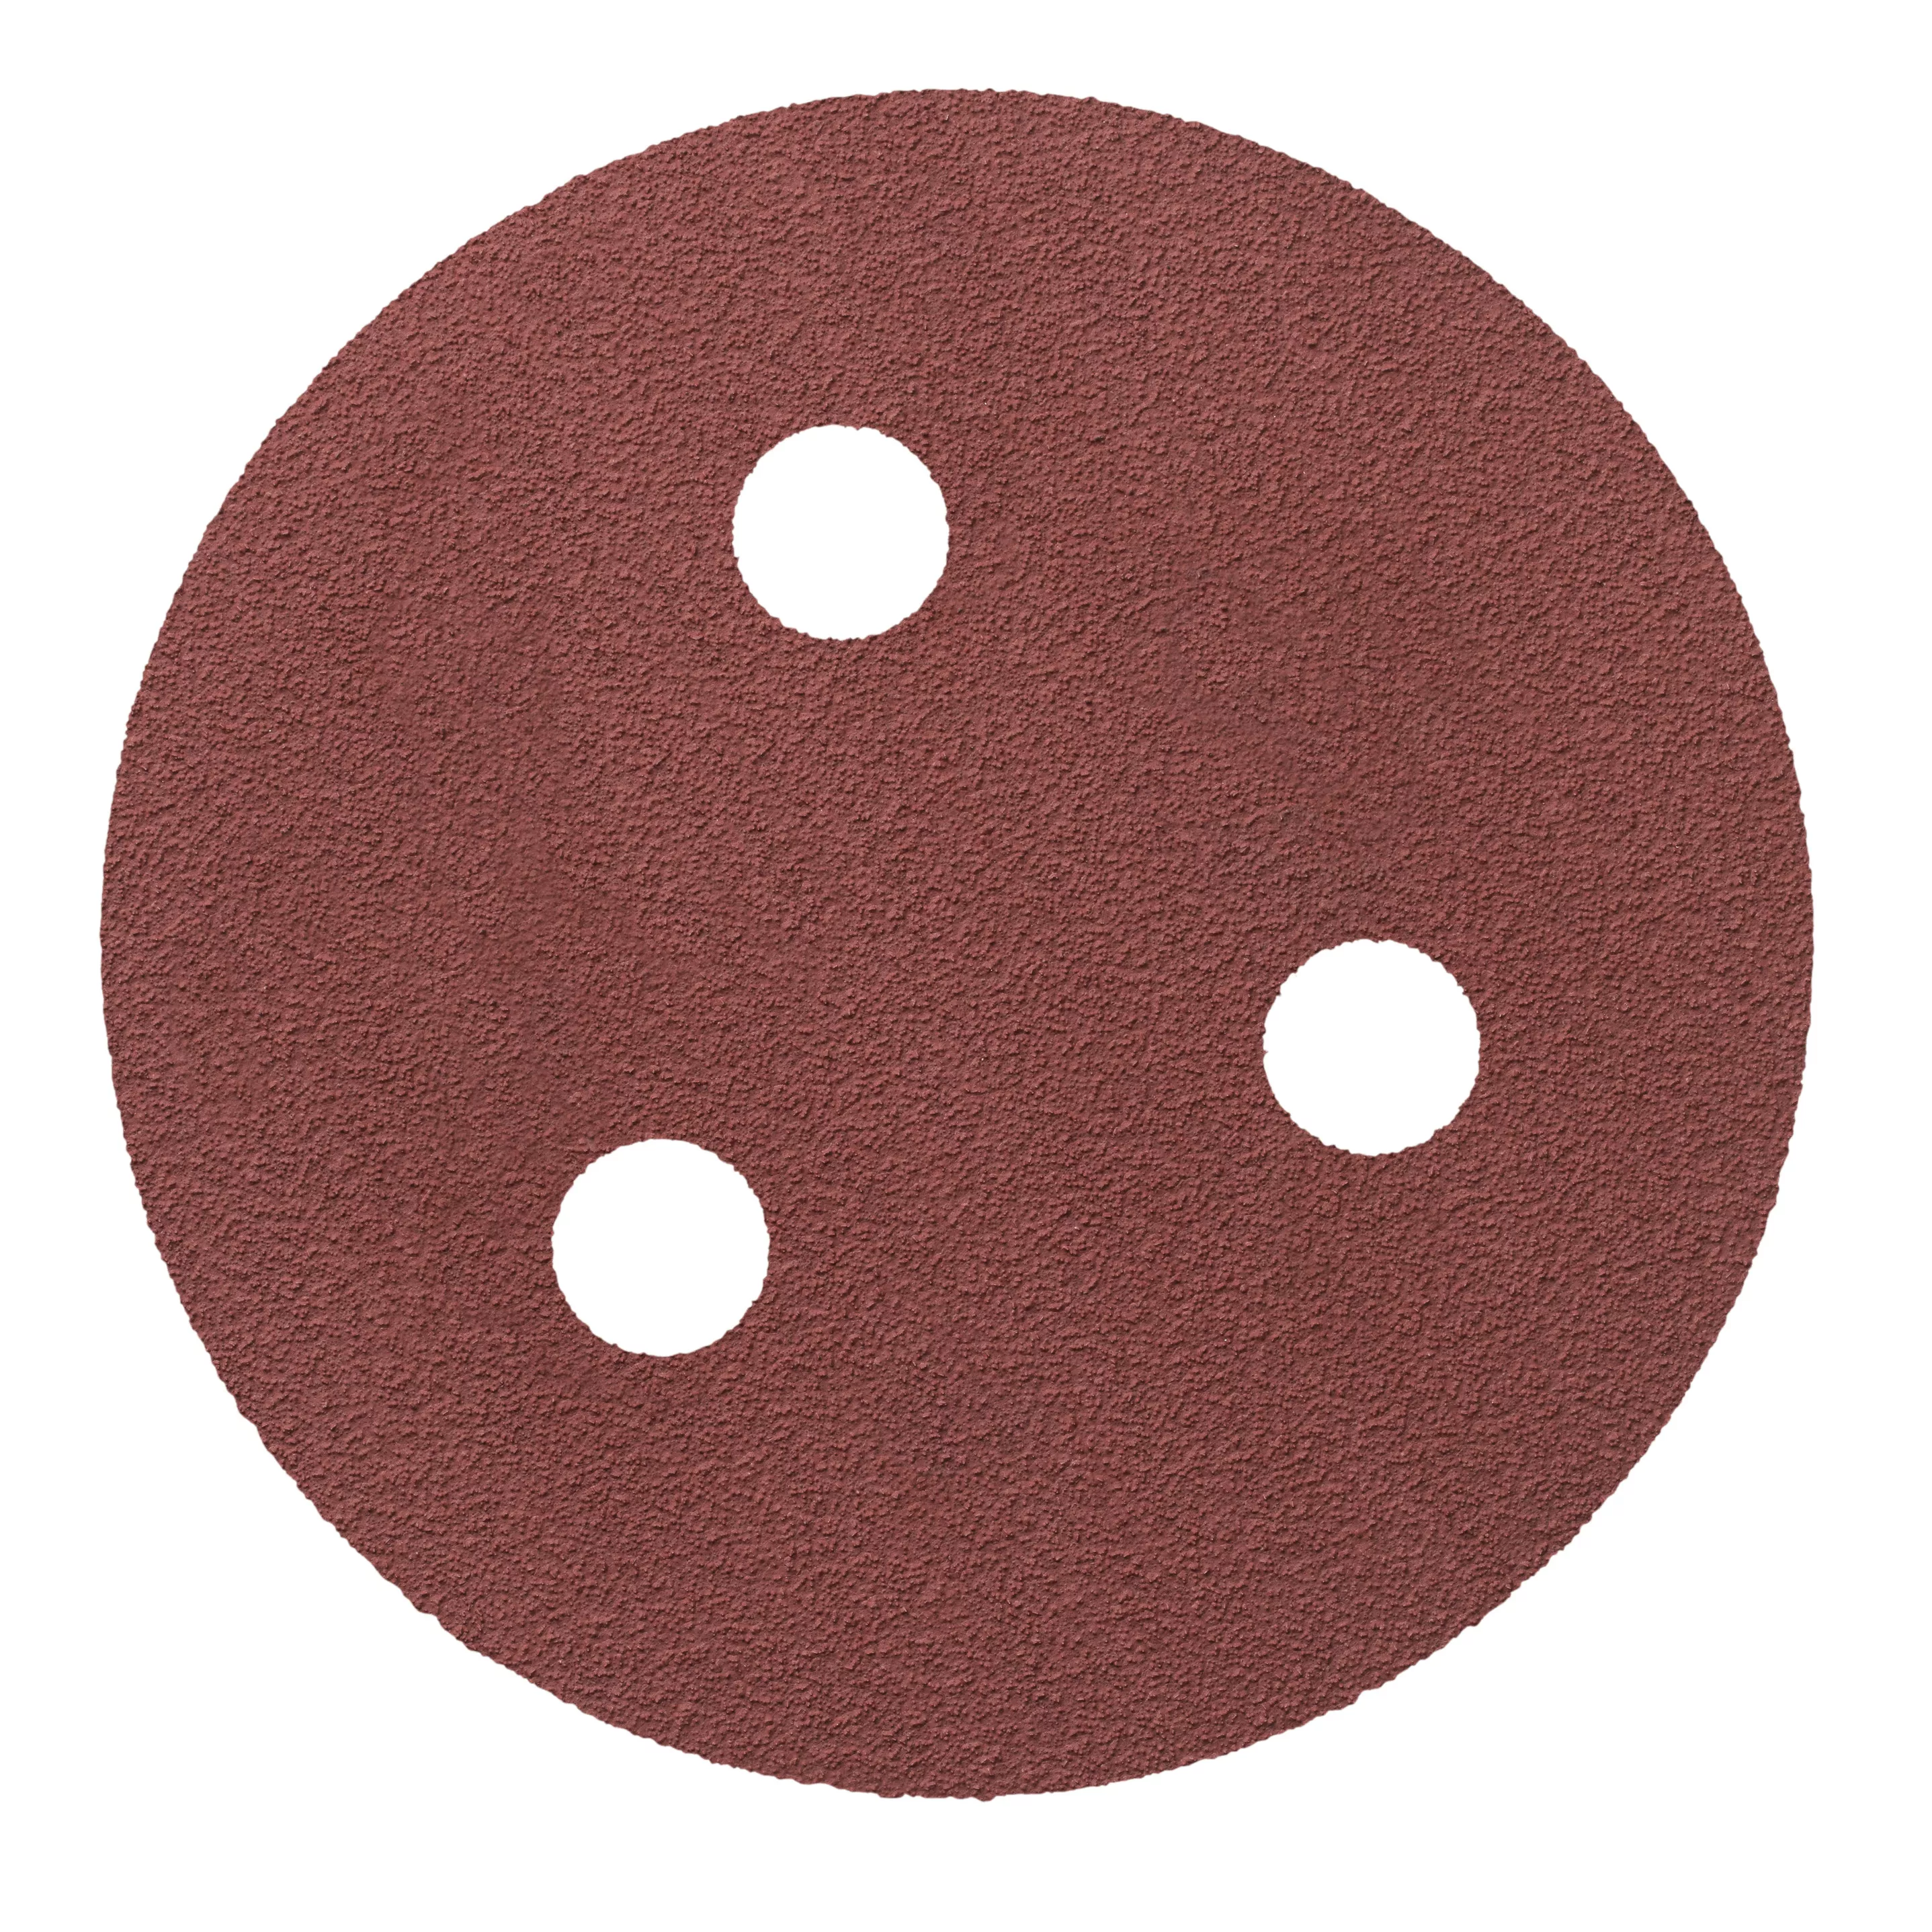 3M™ Cubitron™ II Hookit™ Cloth Disc 947A, 80+ X-weight, 3 in x NH, D/F
3HL, Die 300BE, 25/Carton, 200 ea/Case